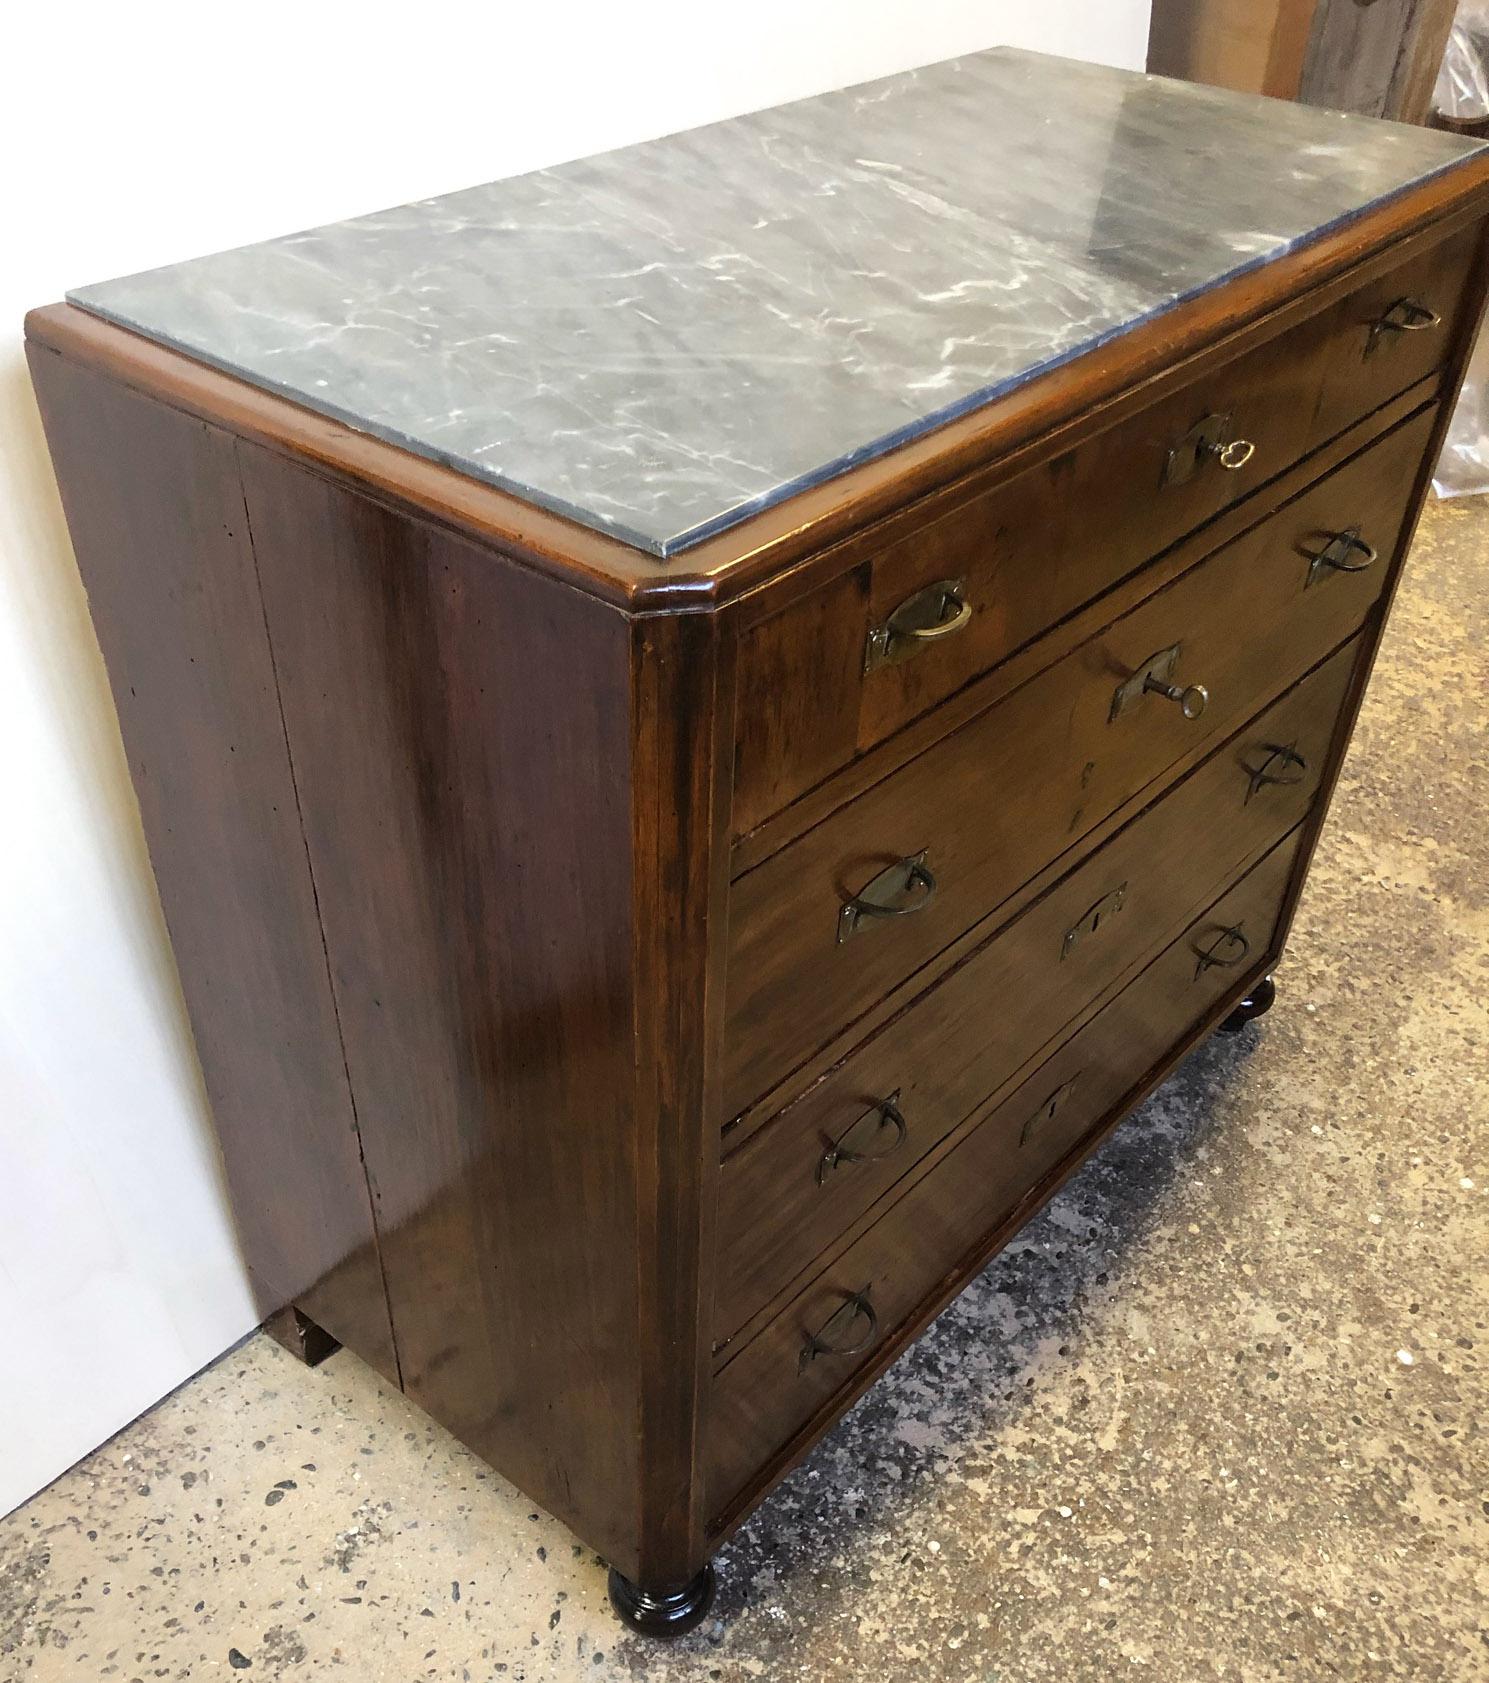 1900 Original Italian chest of drawers in walnut, veneered on fir, with four drawers and gray marble. 
Comes from an old country house in the centre of Chianti area of Tuscany.
The paint is original in patina, honey amber color. 
As shown in the